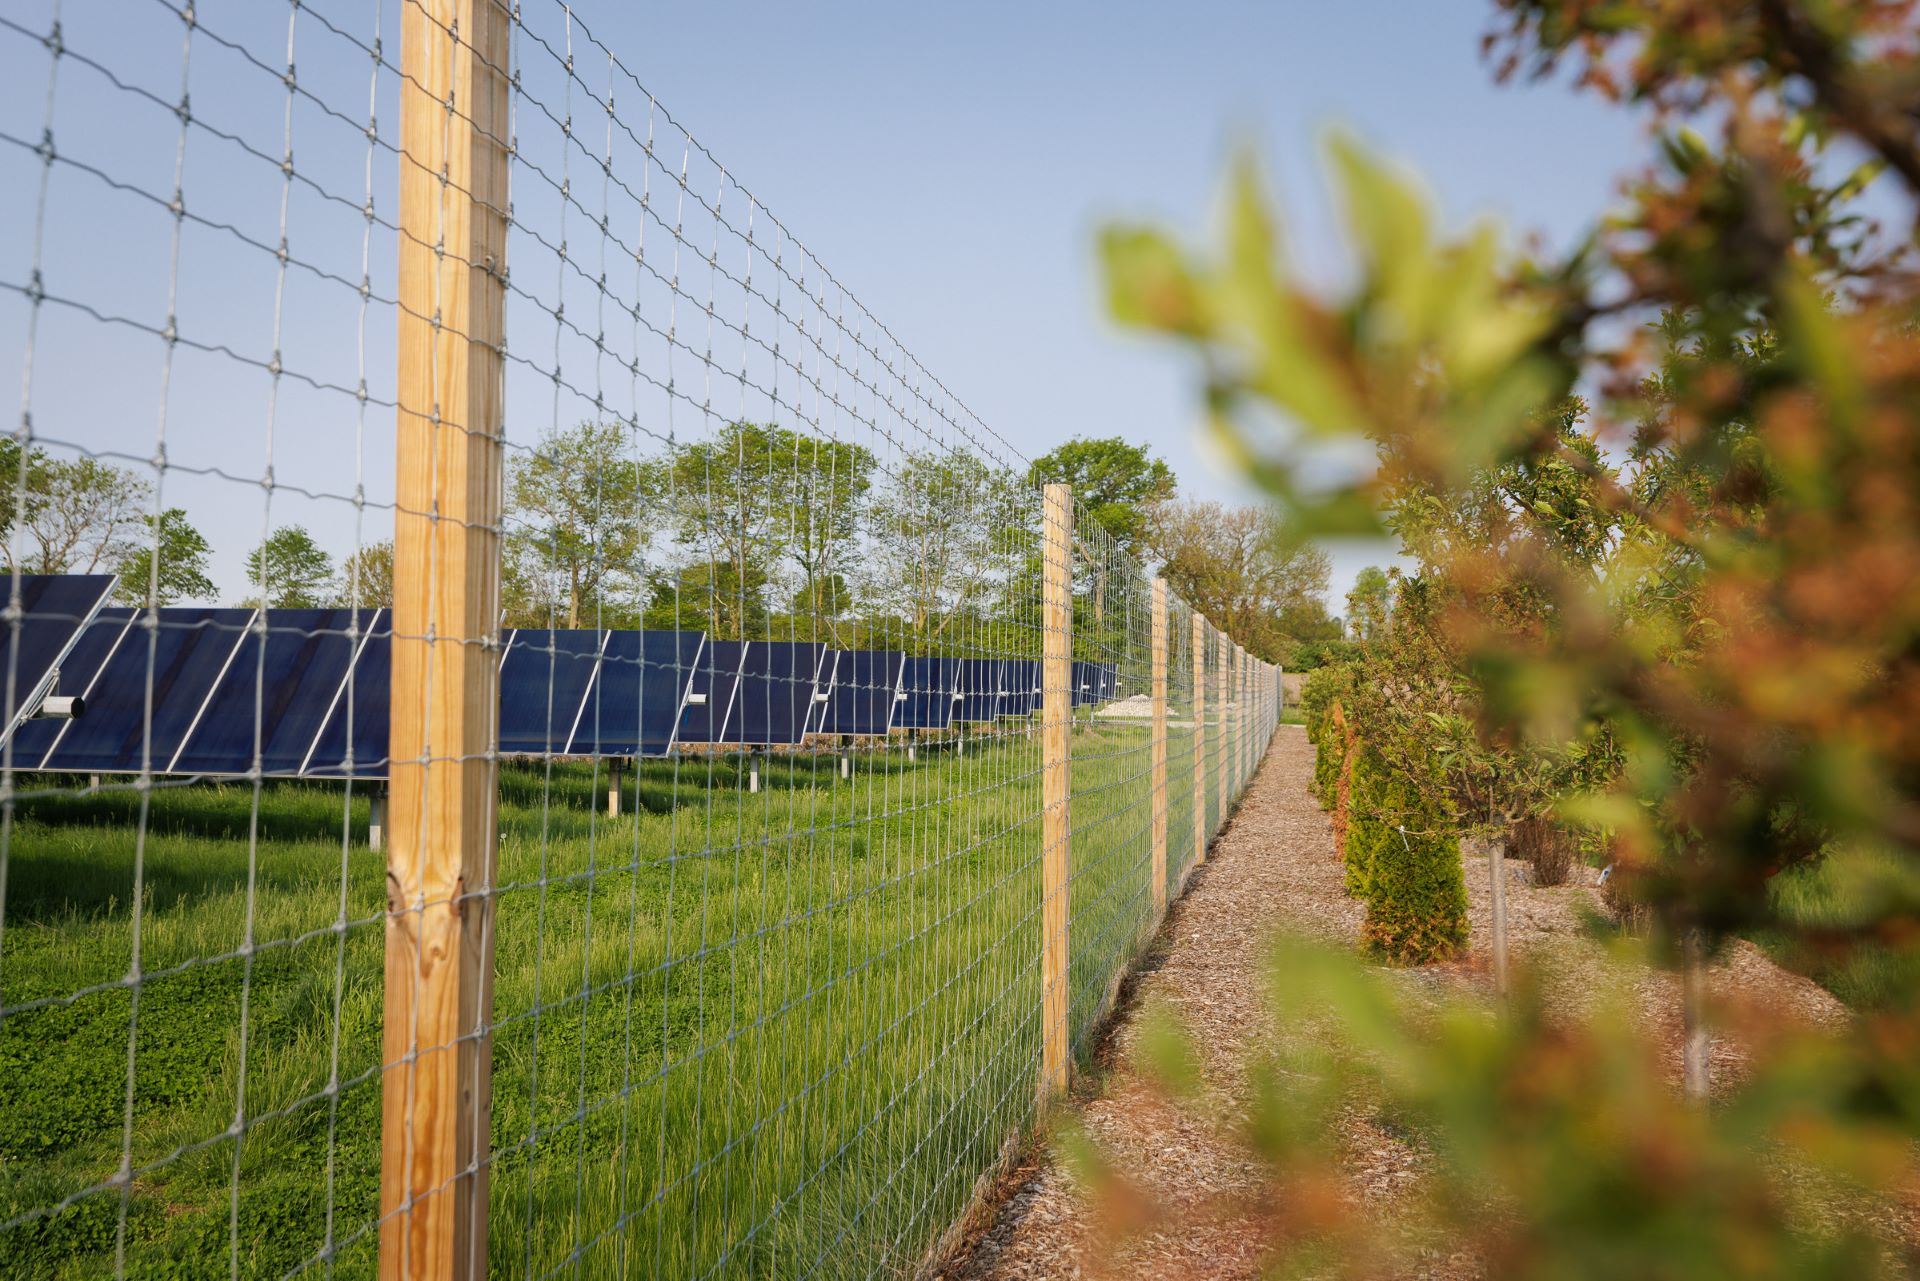 Farm-style fencing and vegetative screening on the perimeter of Bellflower solar in Indiaa